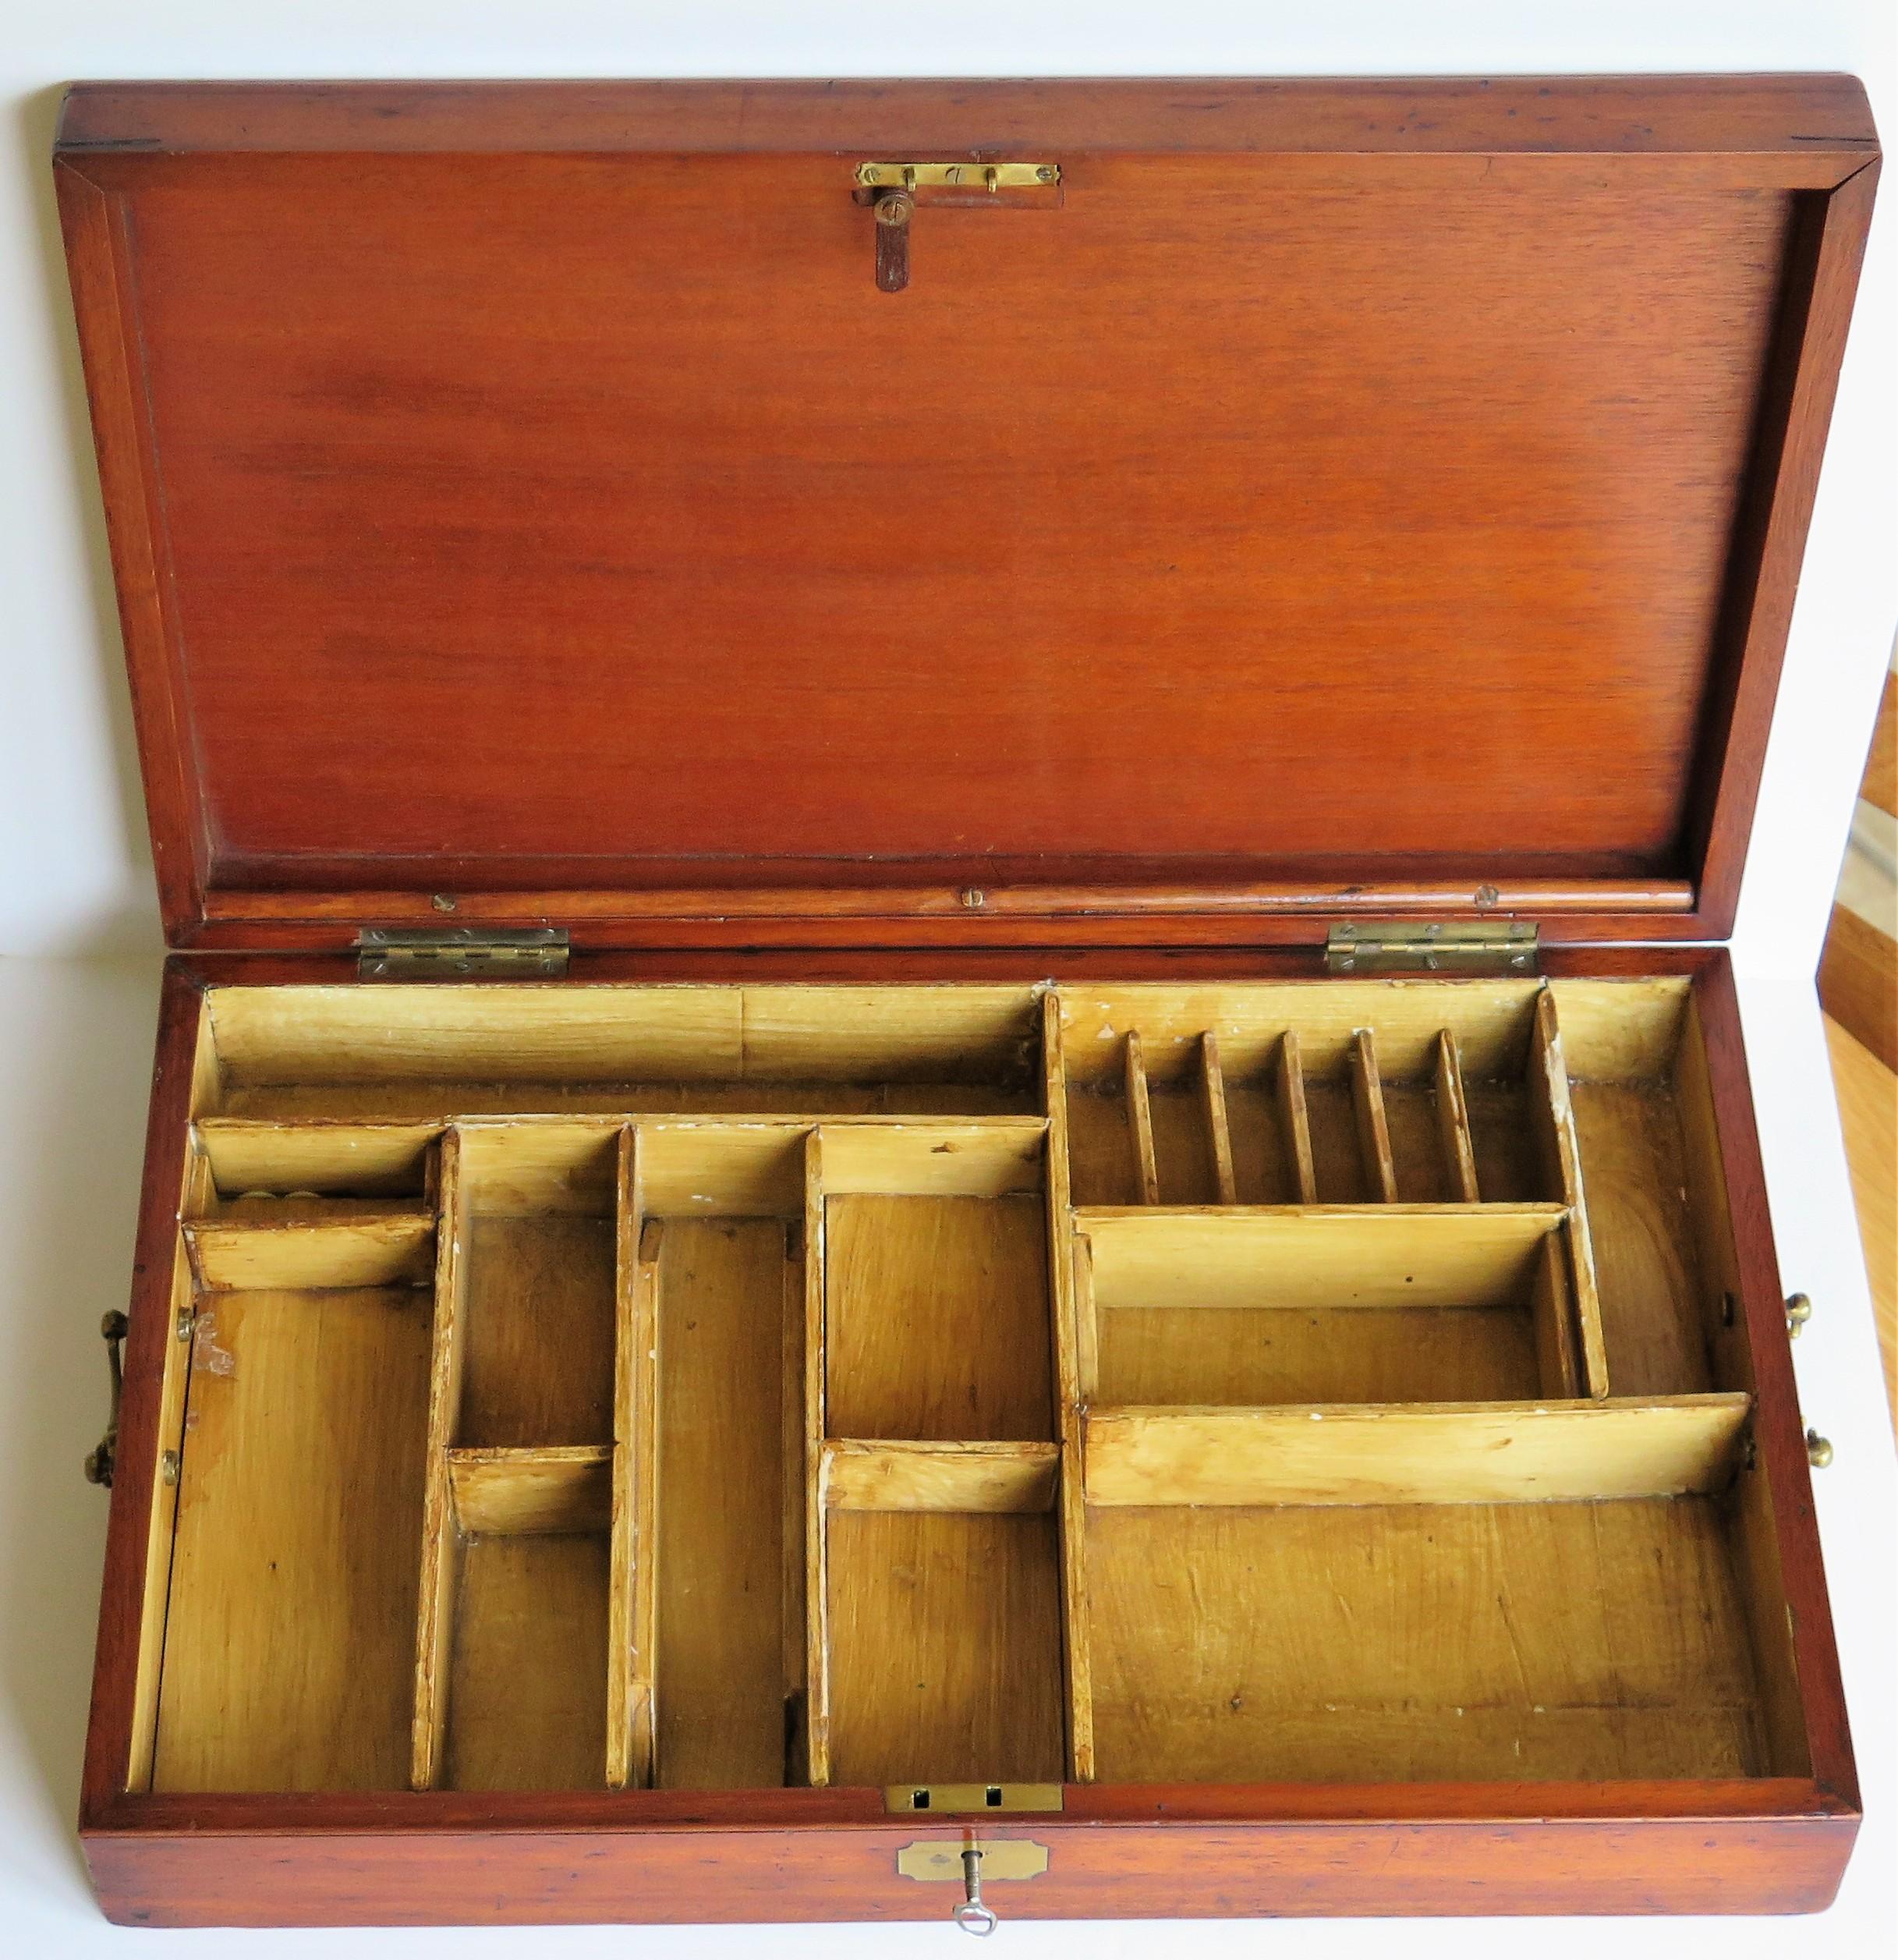 English 19th Century Complete Games Compendium in Hardwood Jointed Box over 10 Games